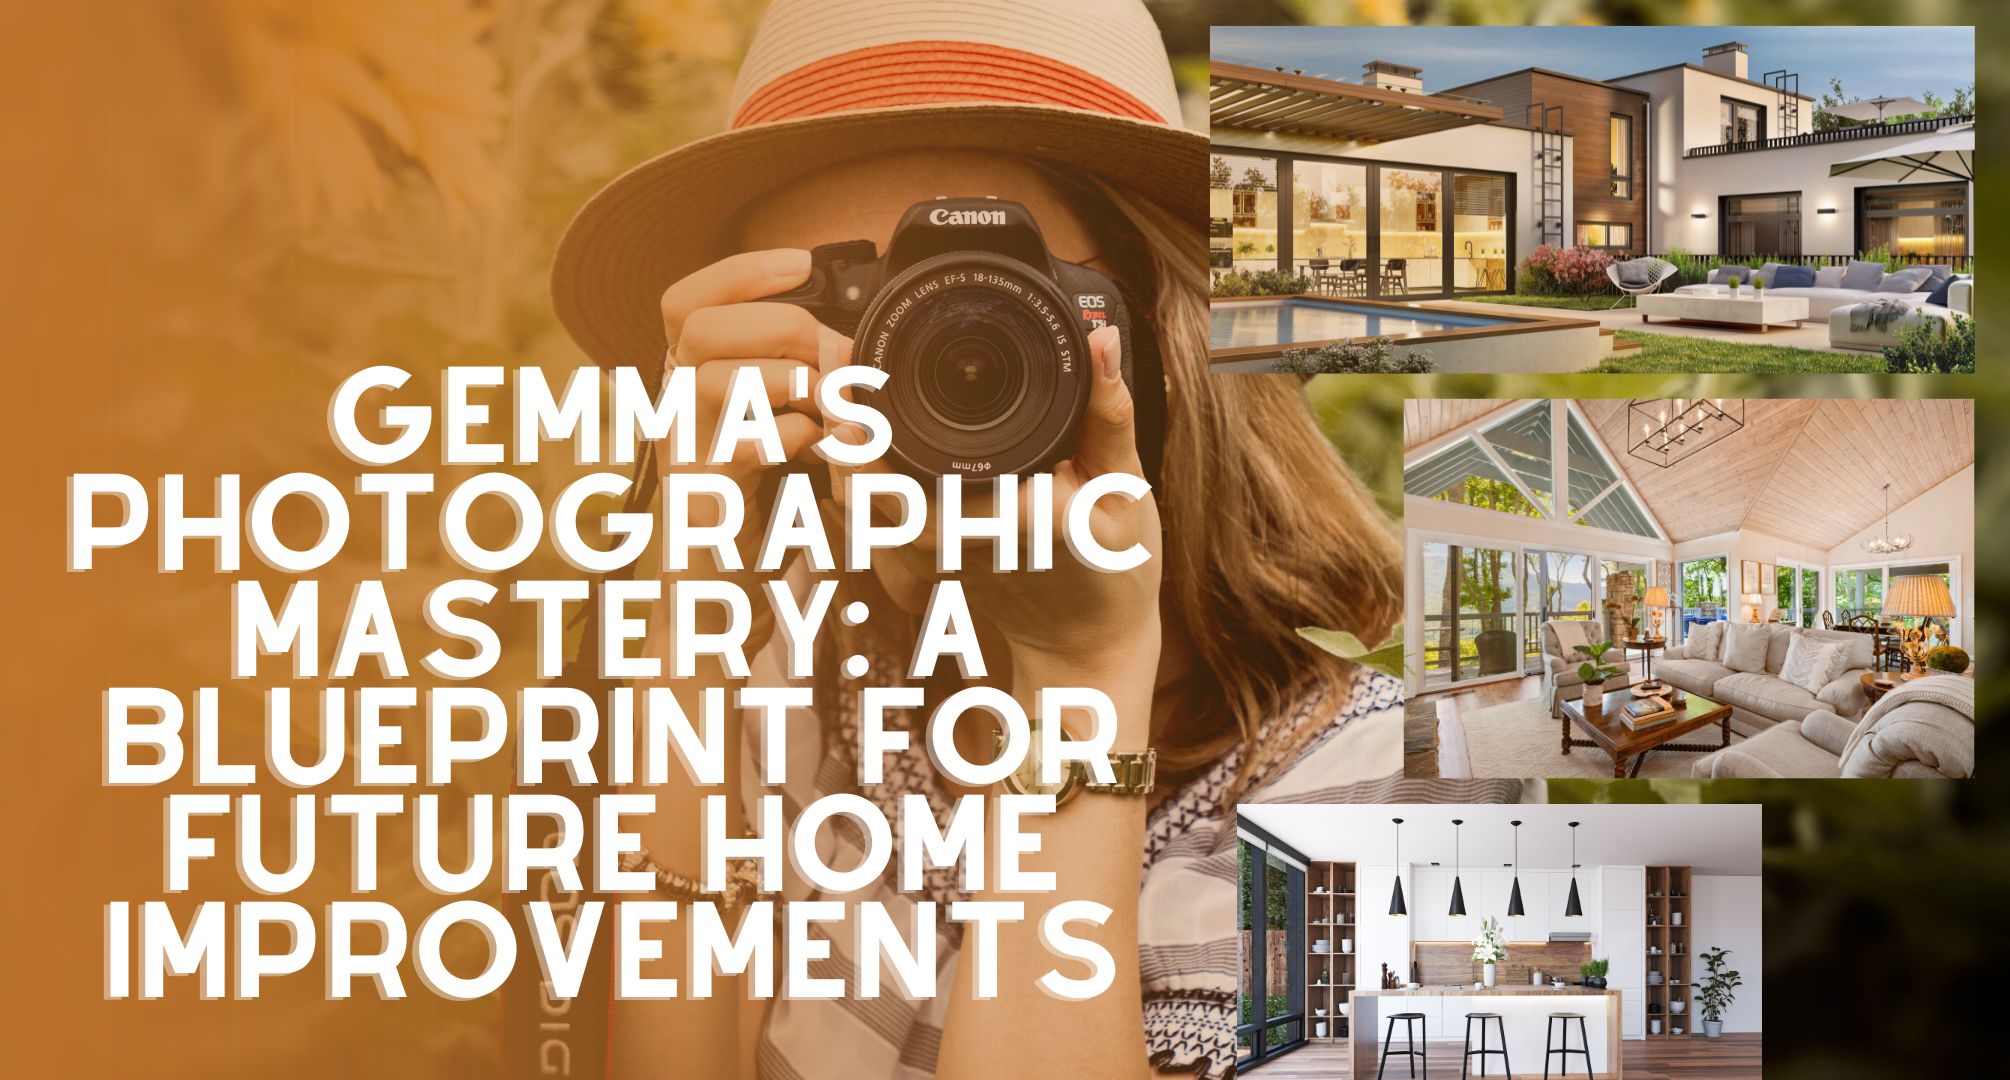 Gemma's Photographic Mastery: A Blueprint for Future Home Improvements